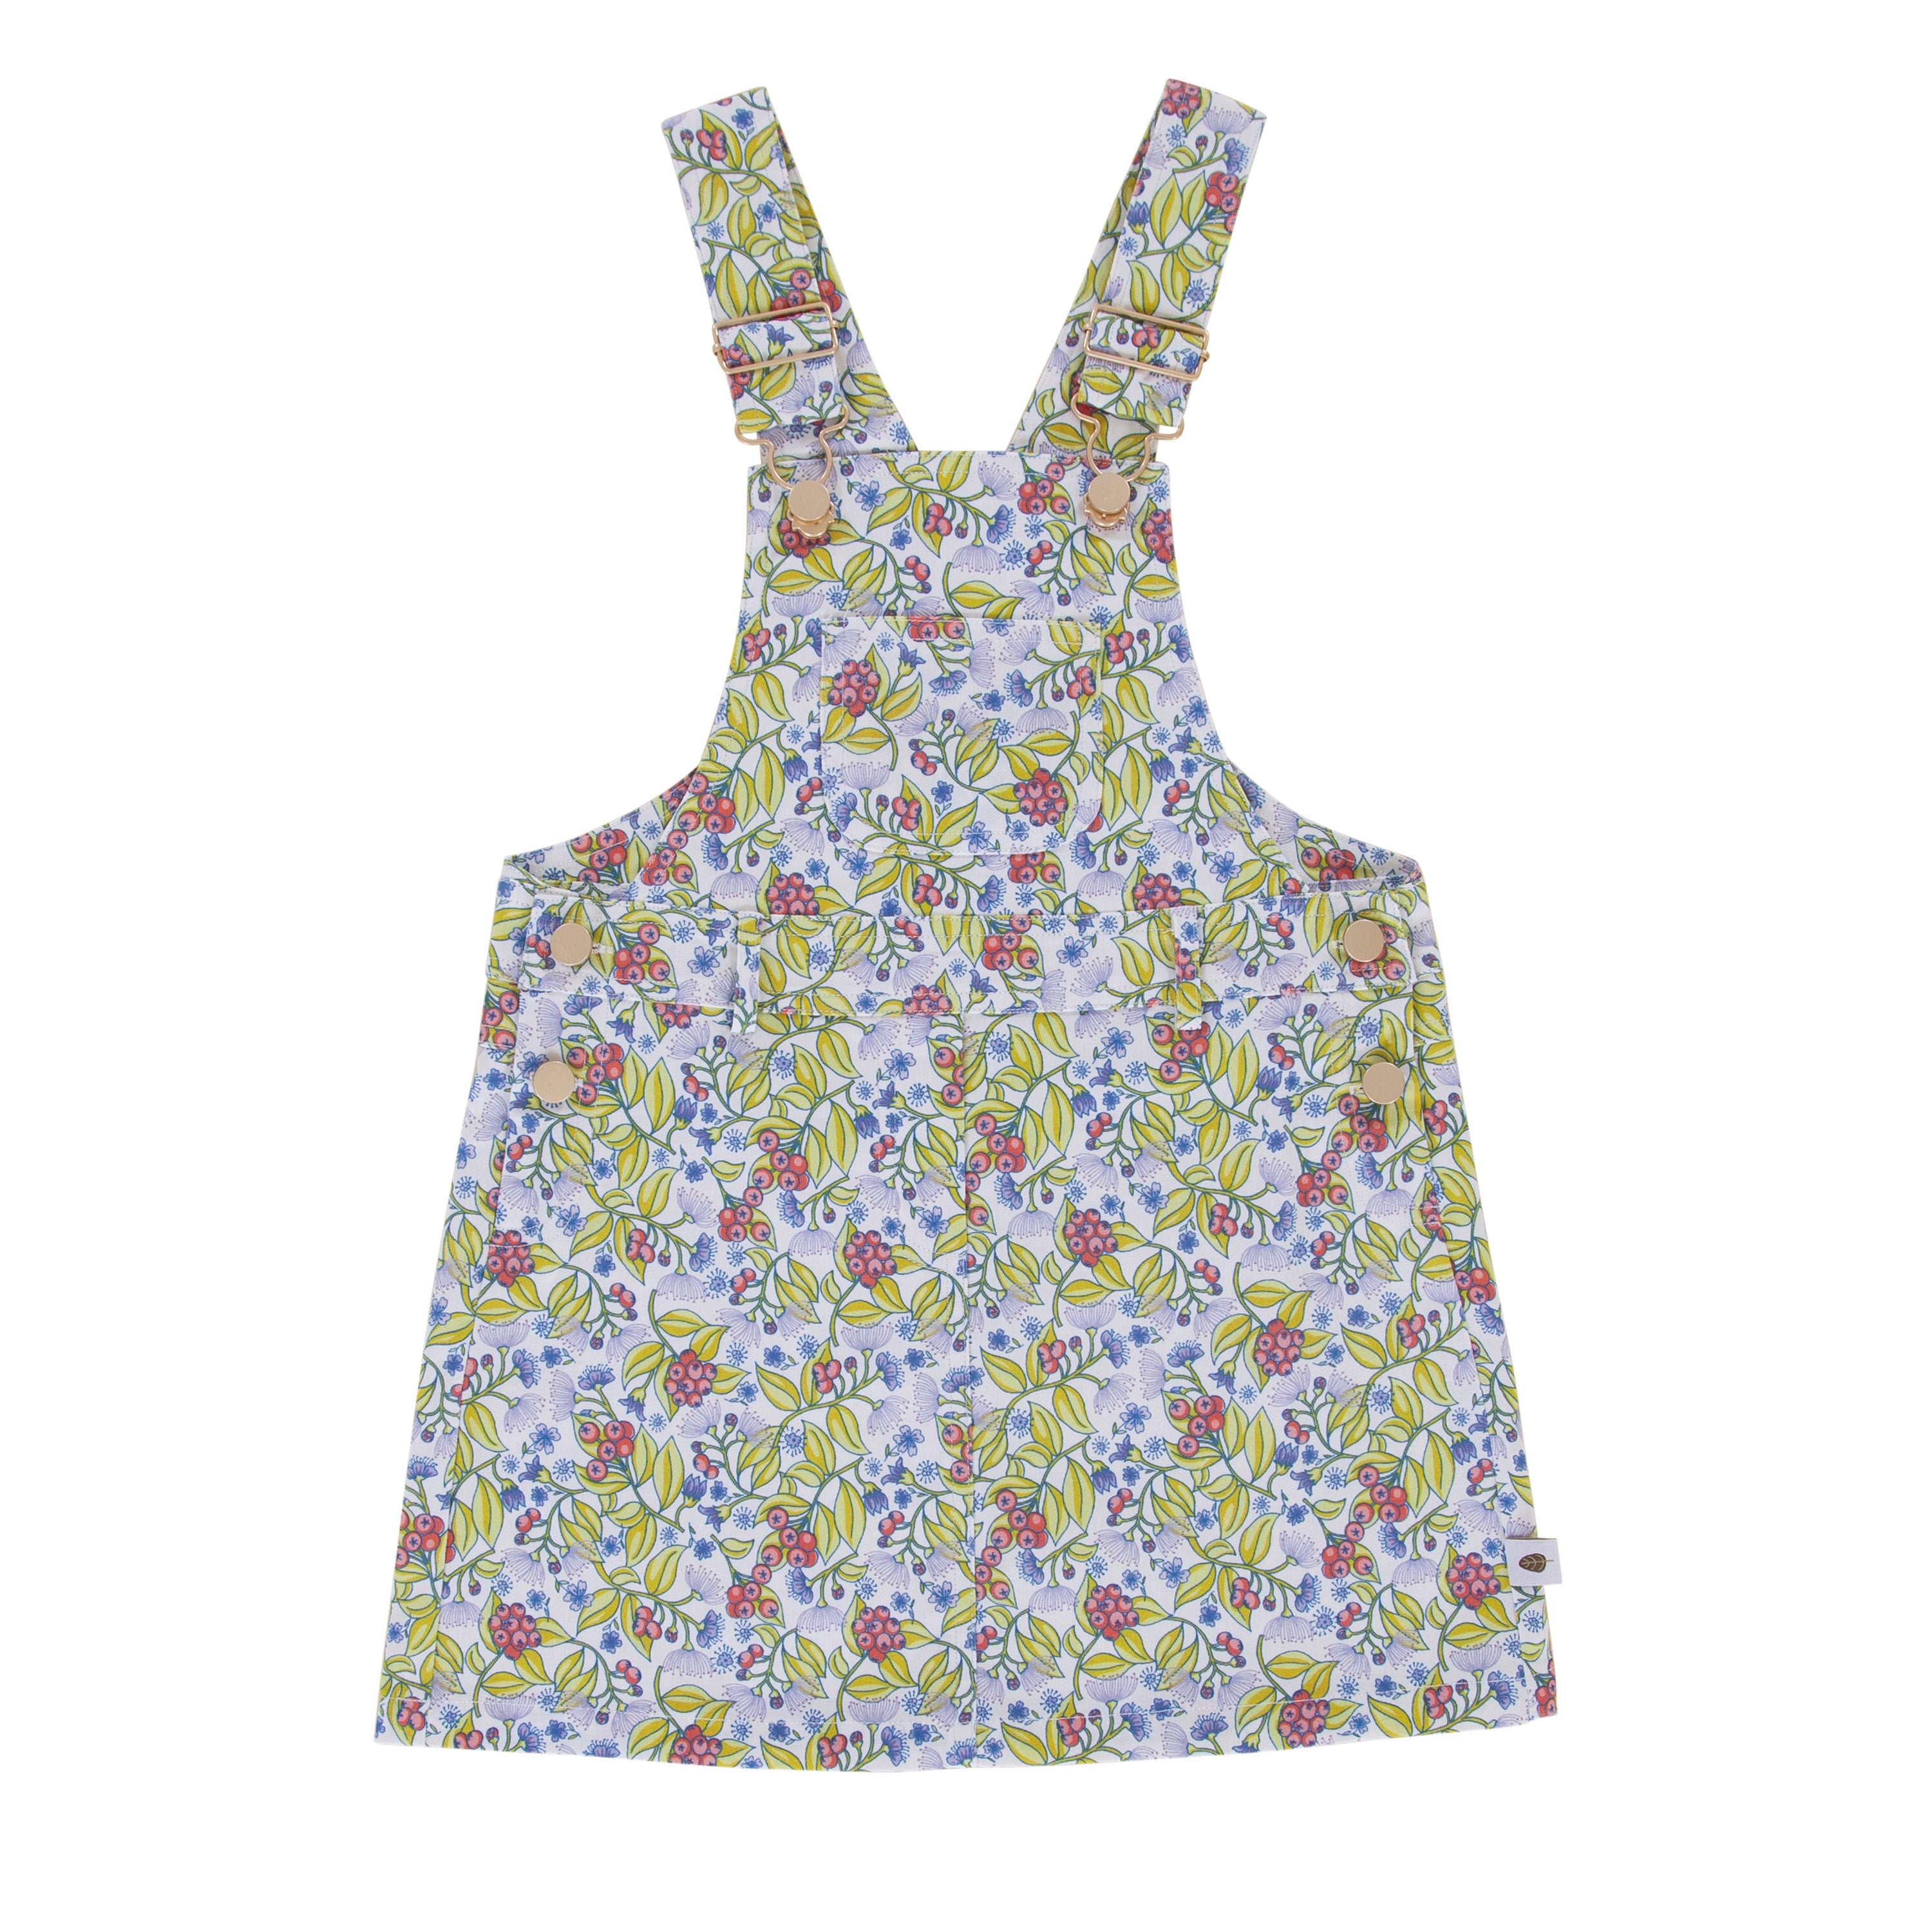 Peggy - Empire Pinafore - Lilly Pilly Print